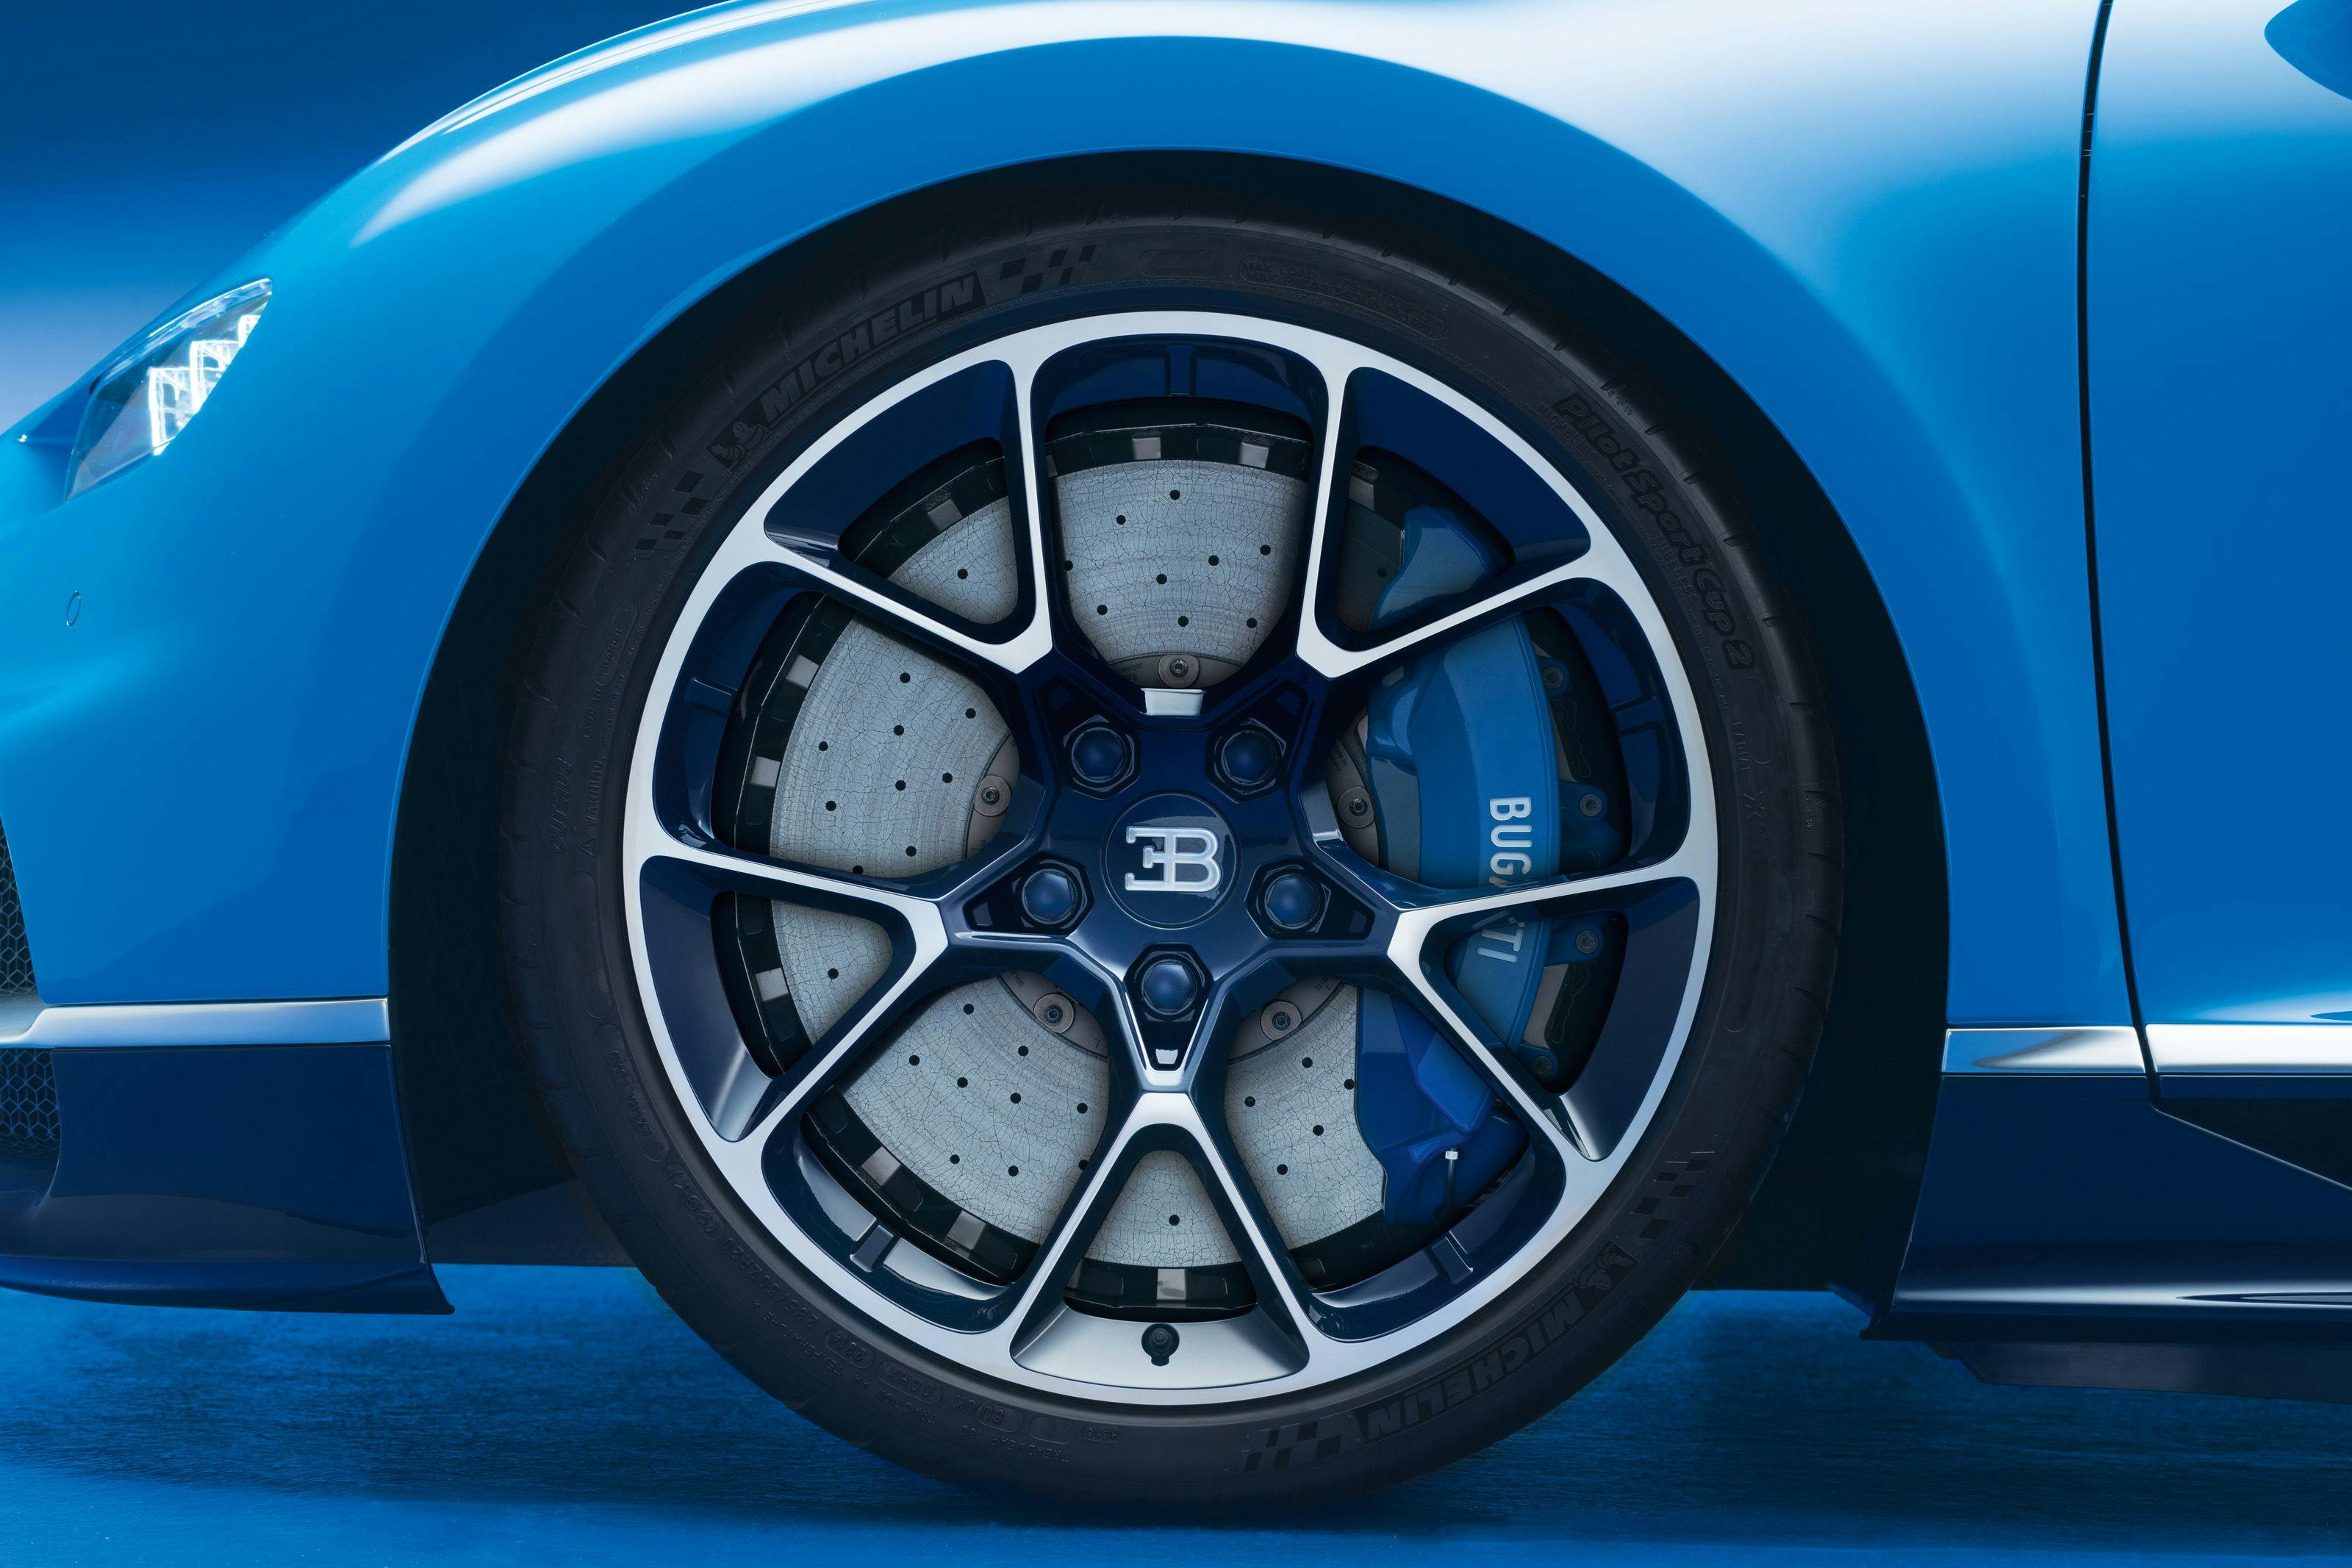 Aluminium wheels as a Bugatti invention – combining design and technology